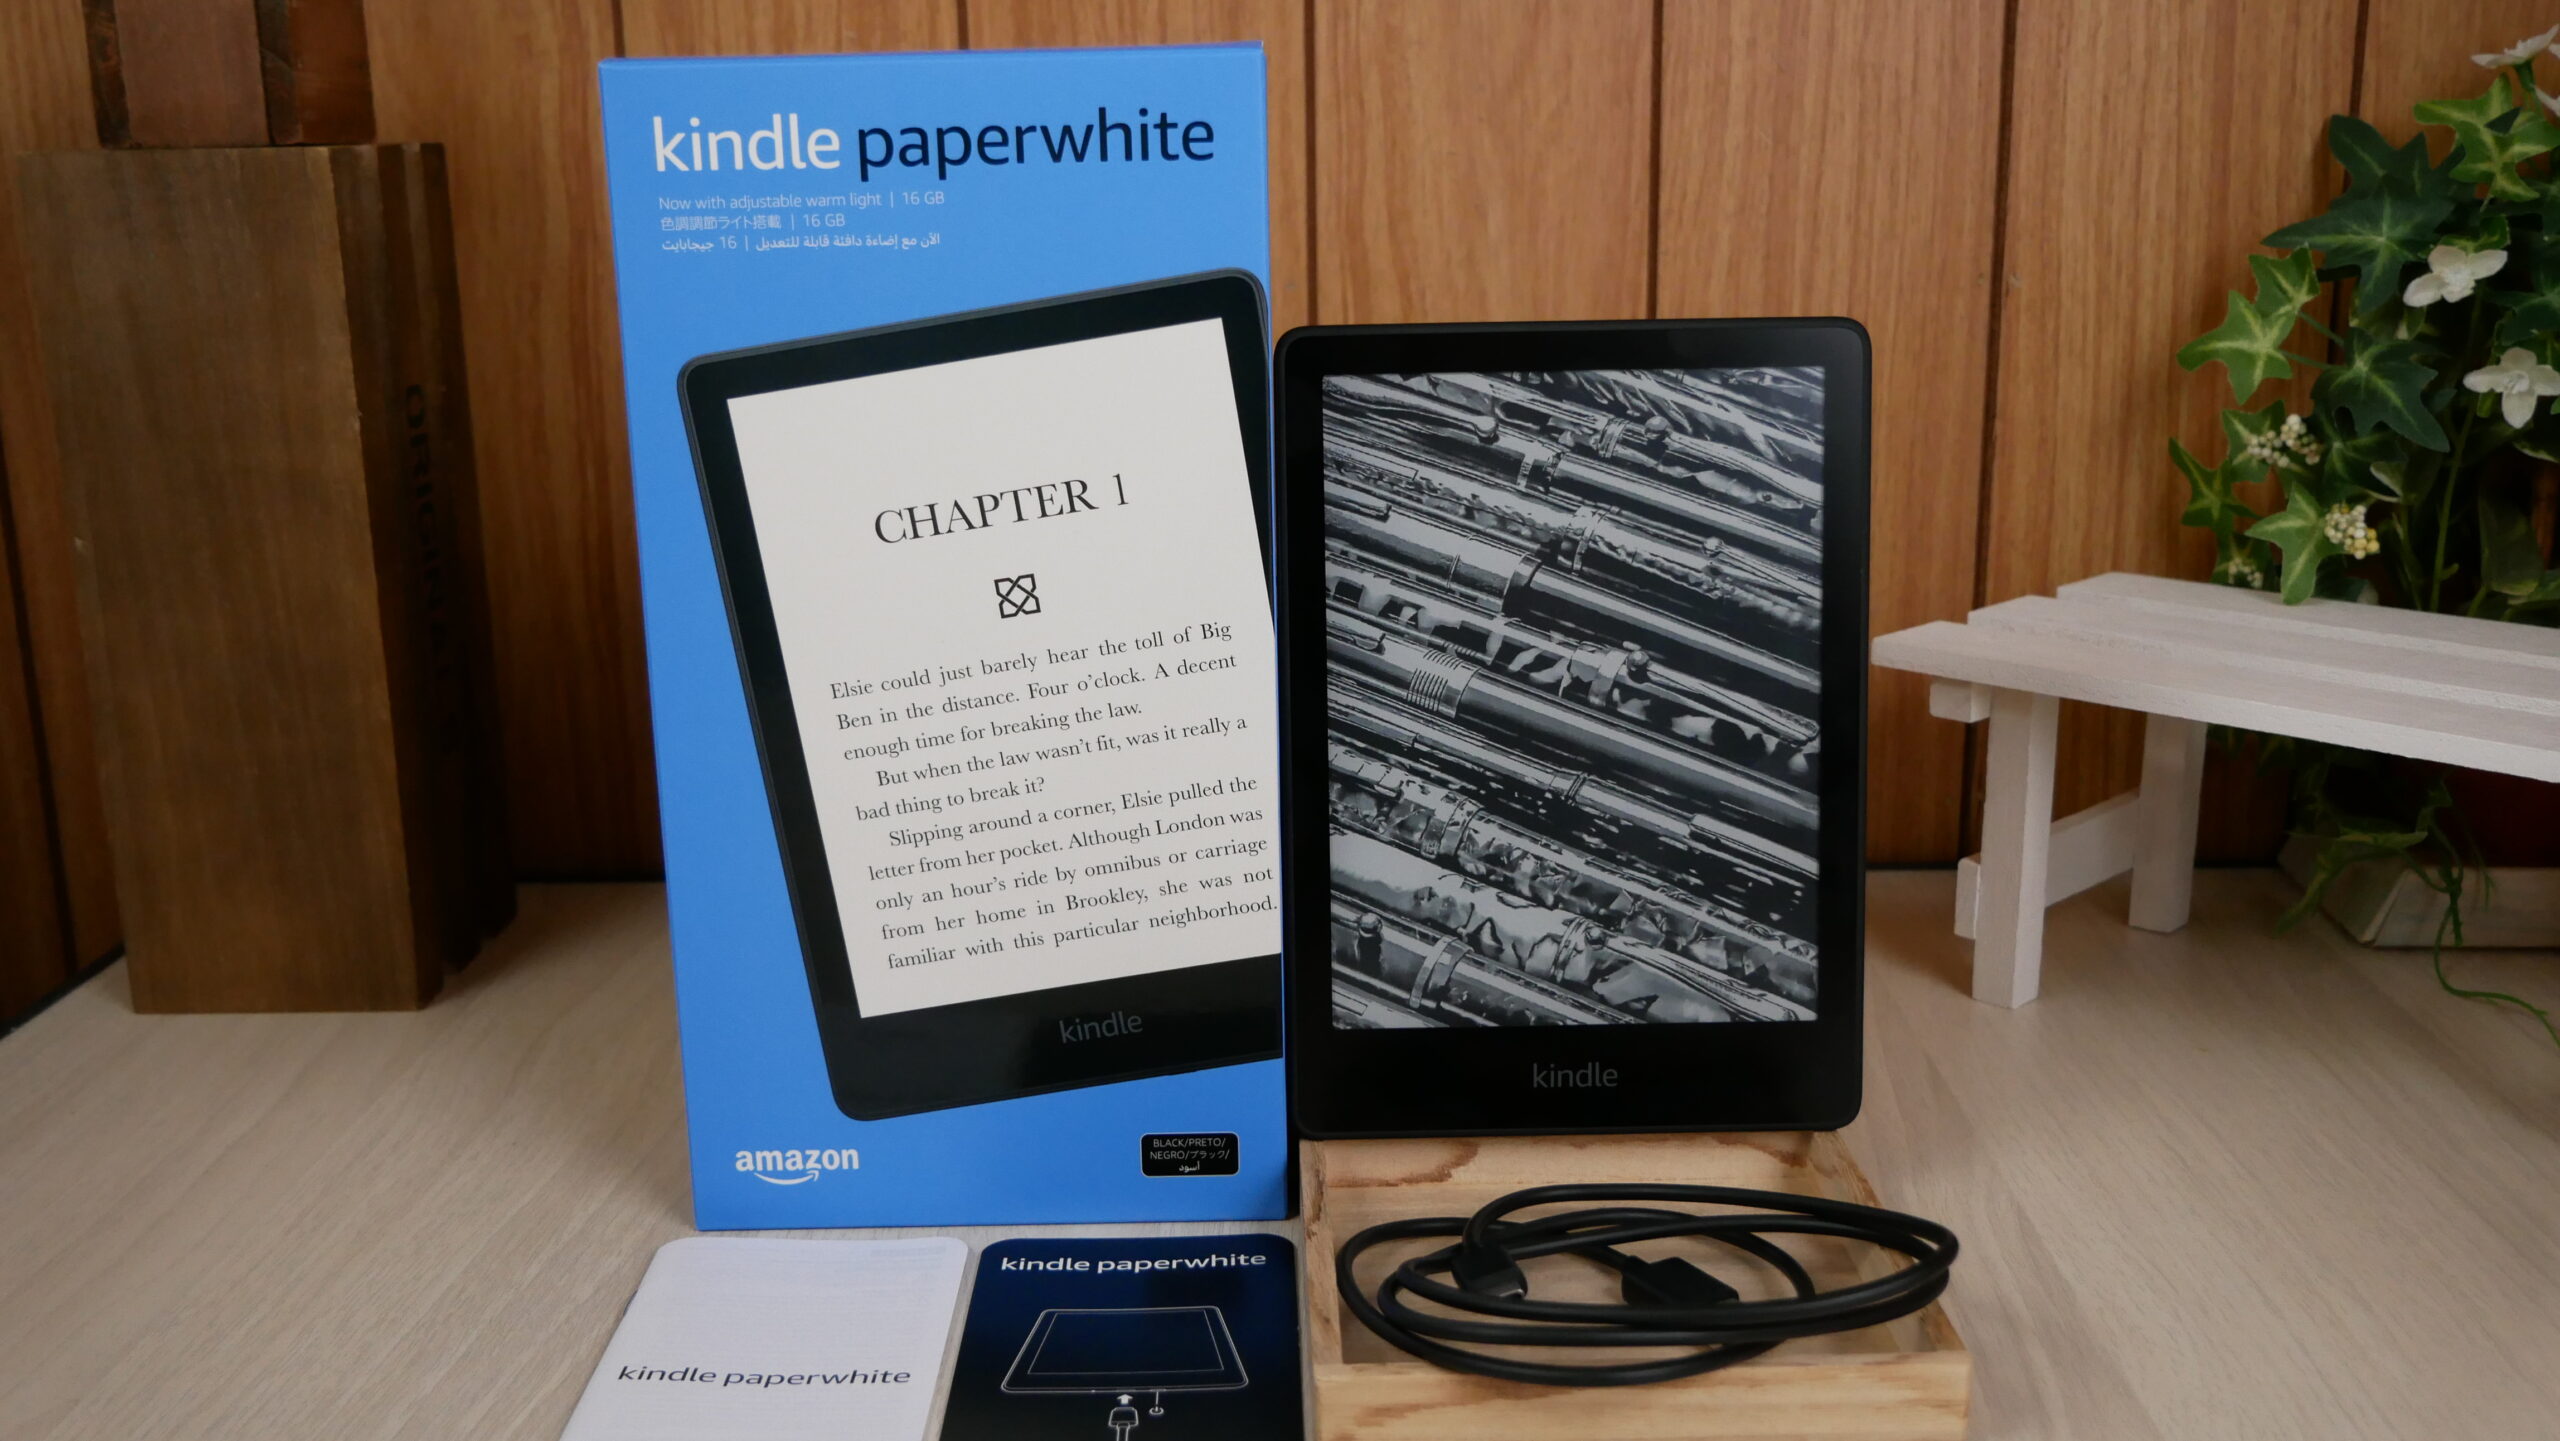 Hands on Review of the Amazon Kindle Paperwhite 16GB Model - Good